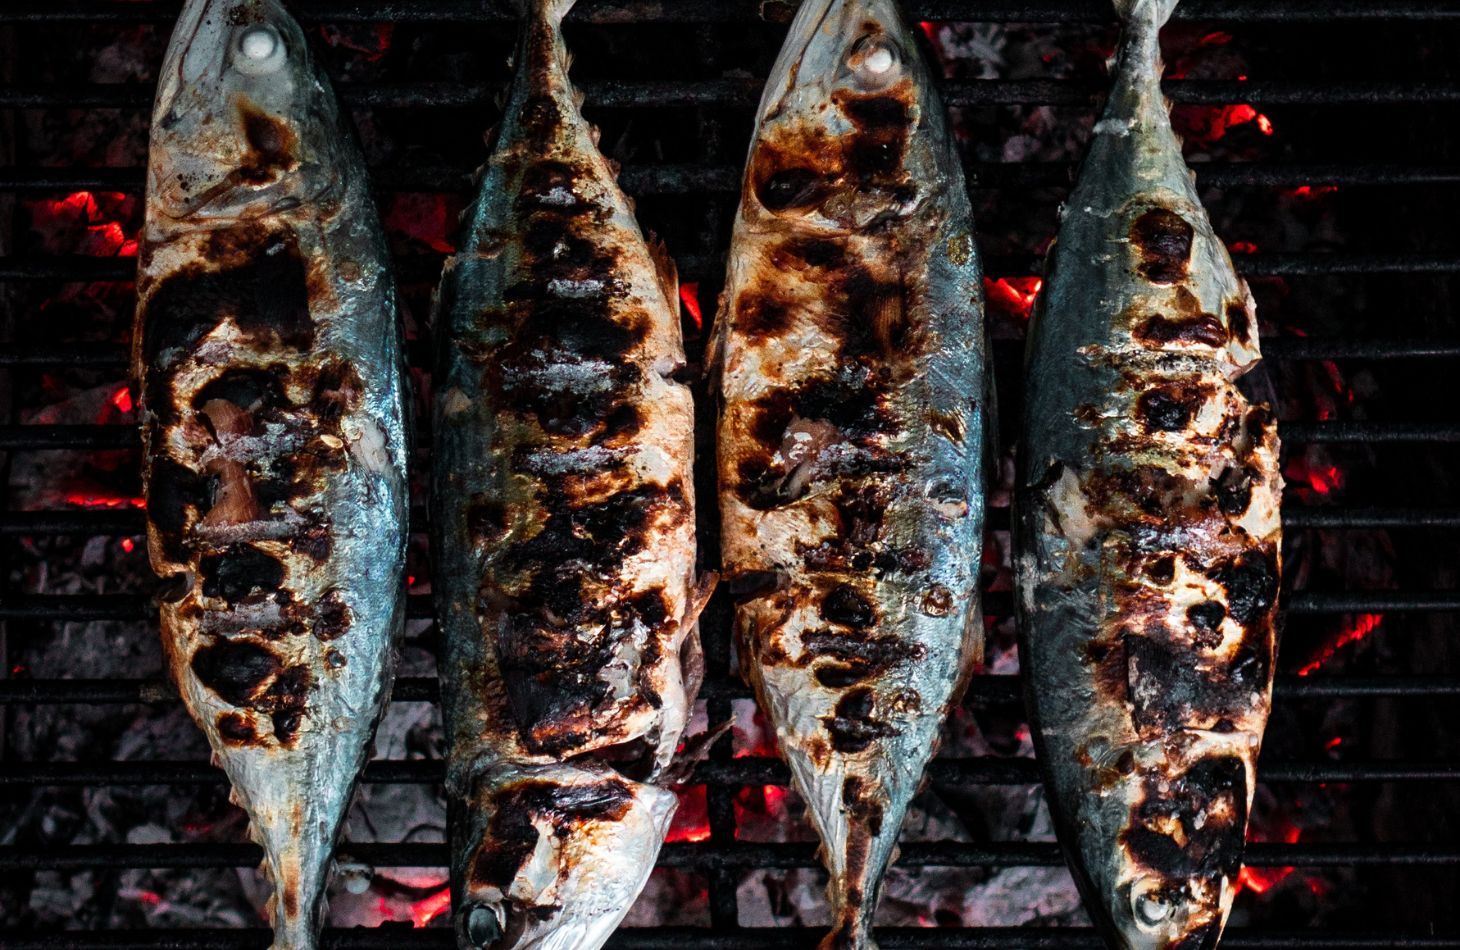 The simple beauty of Portuguese-style grilled sardines